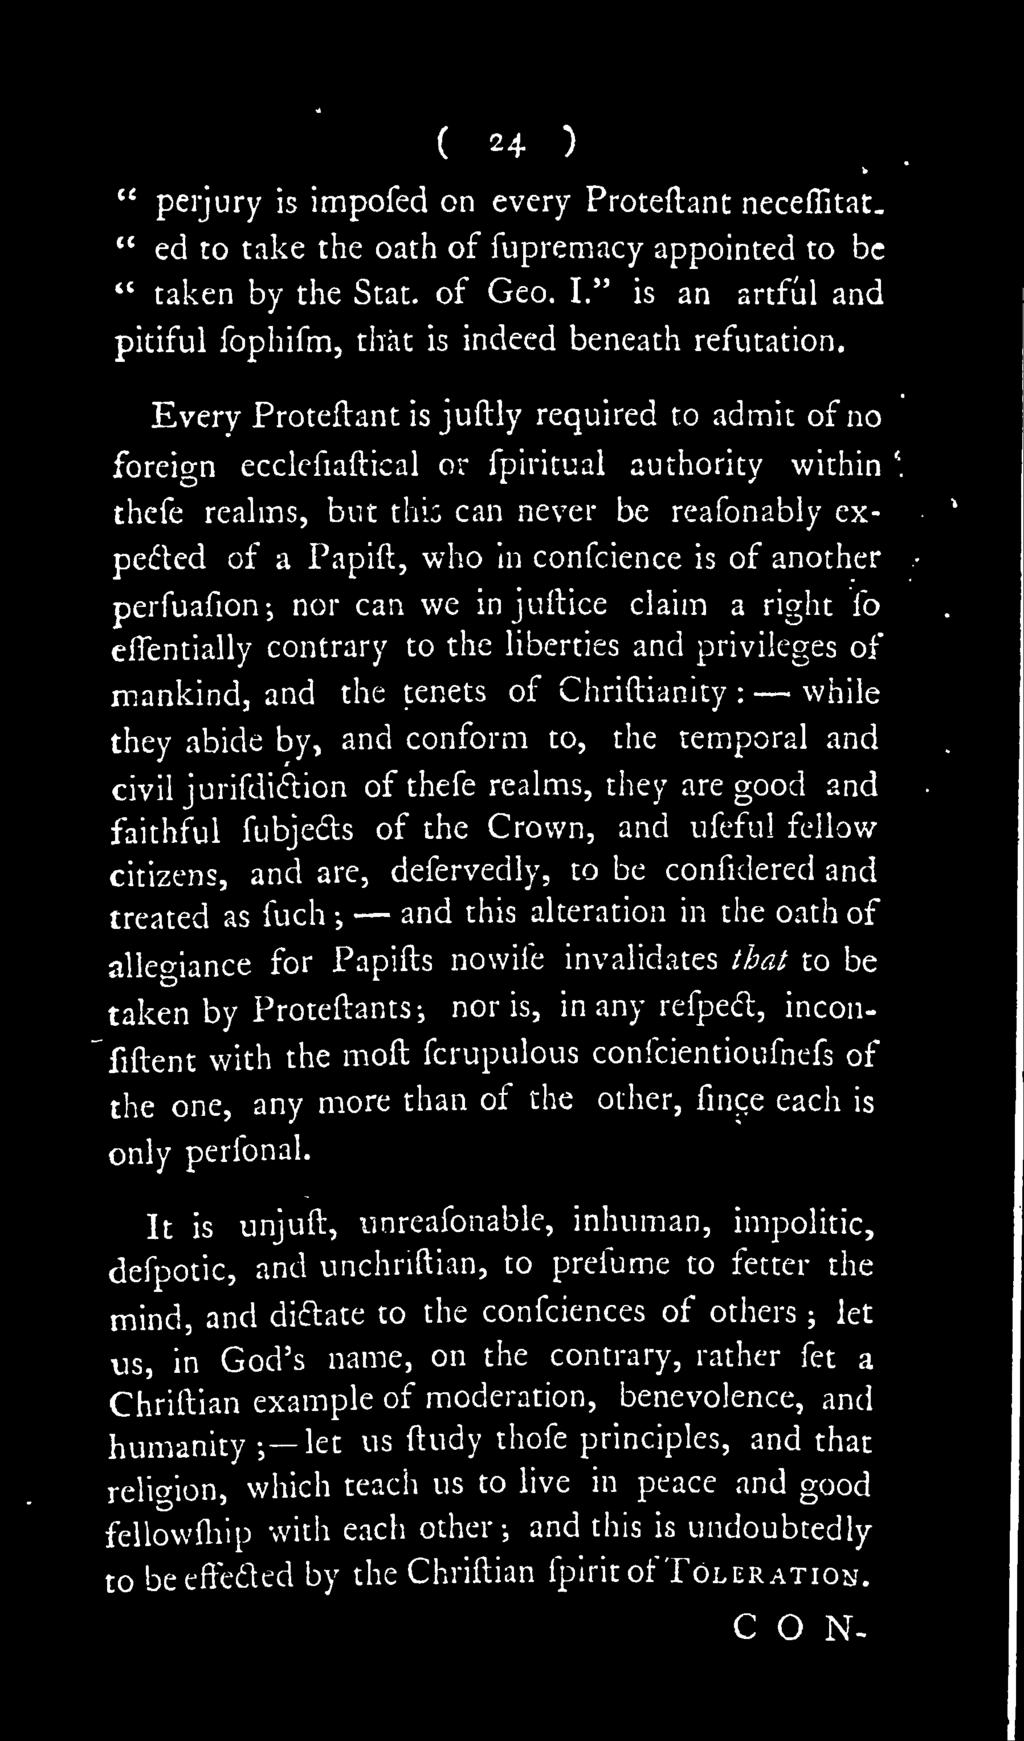 Every Proteftant is juftly required to admit of ho x foreio-n ecclcfiaftical or fpiritual authority within' thefe realms, but this can never be reafonably ex- pedrted of a Papift, who in confcience